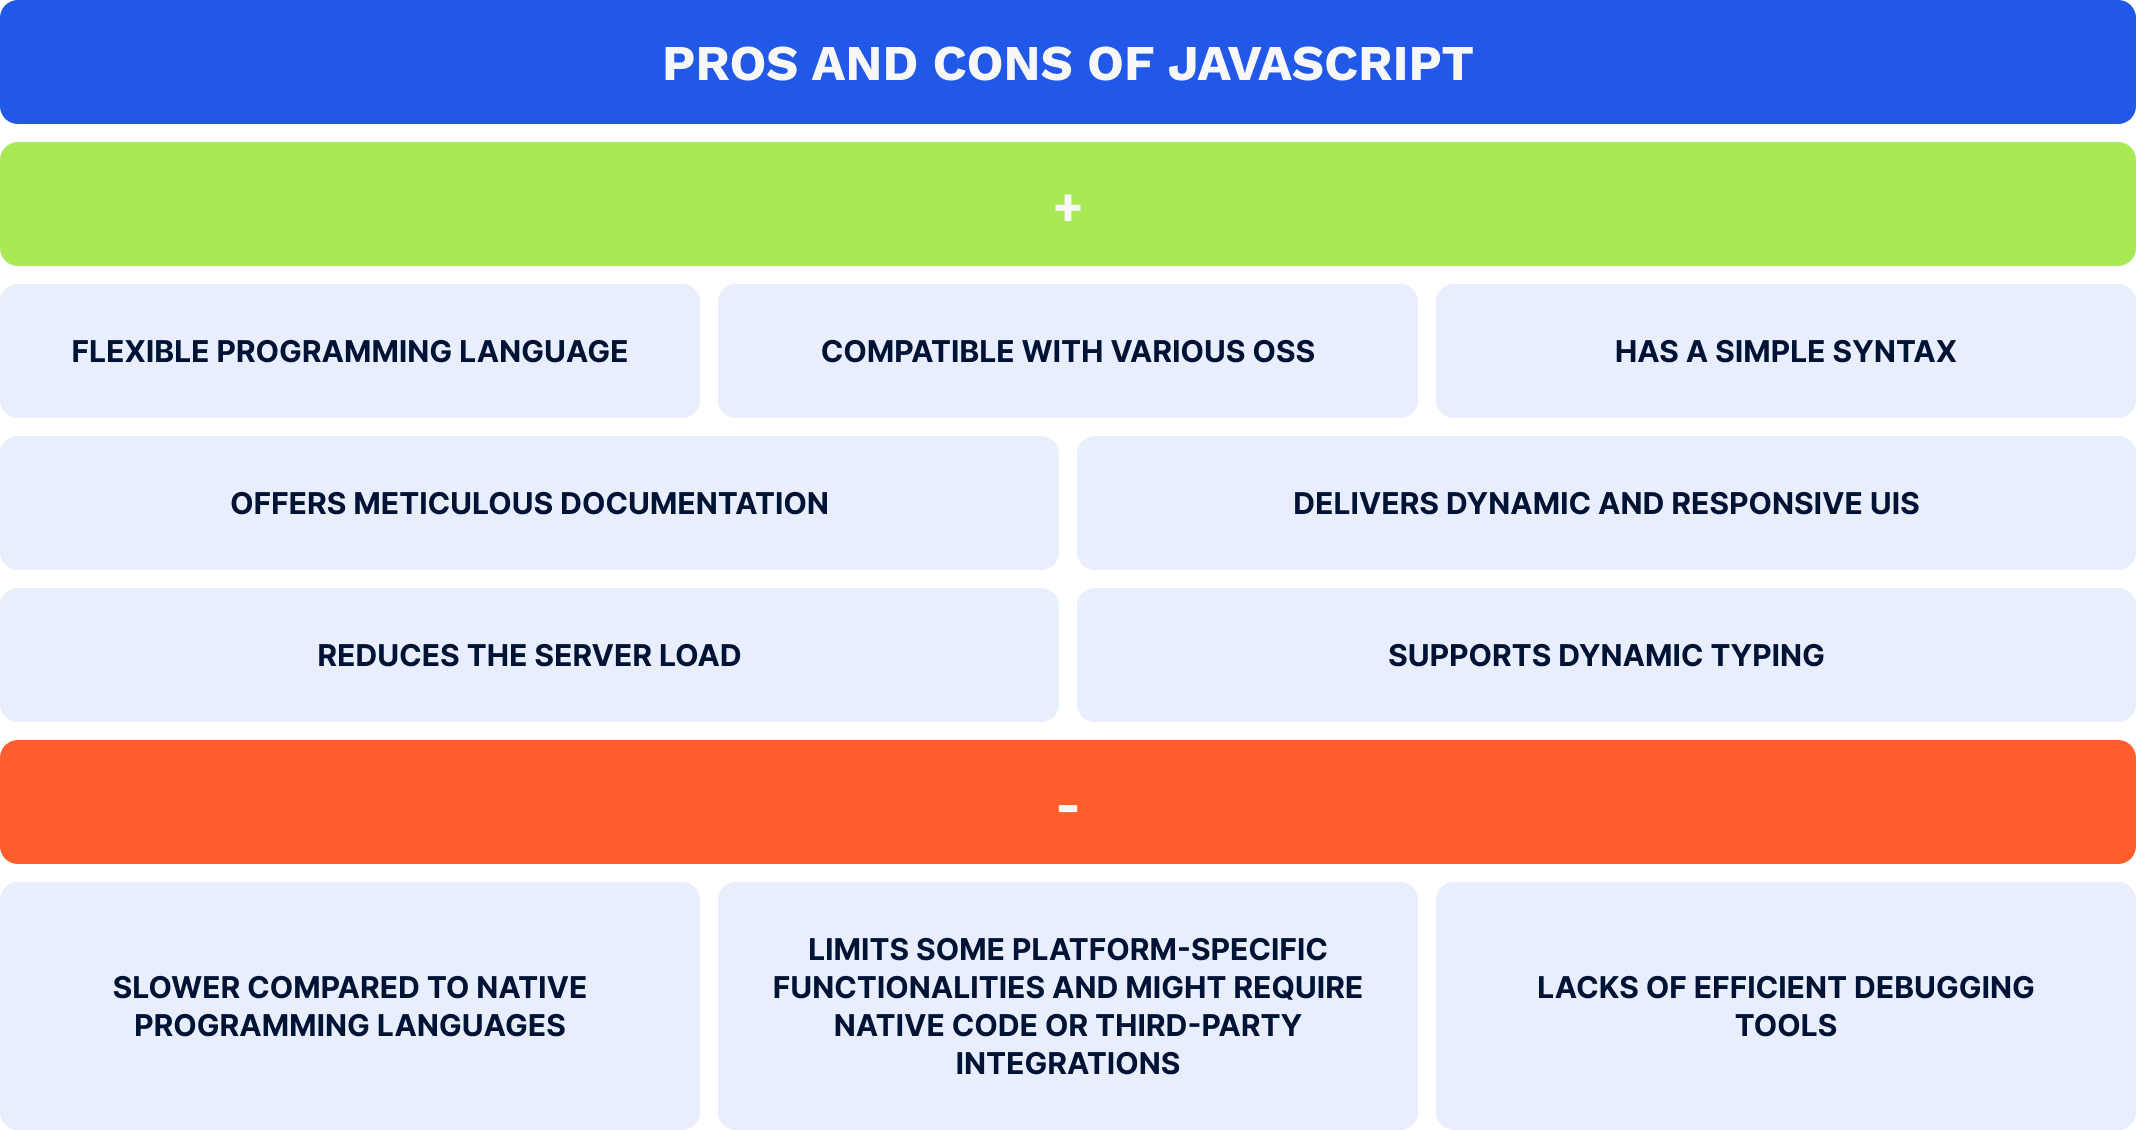 Pros and cons of JavaScript